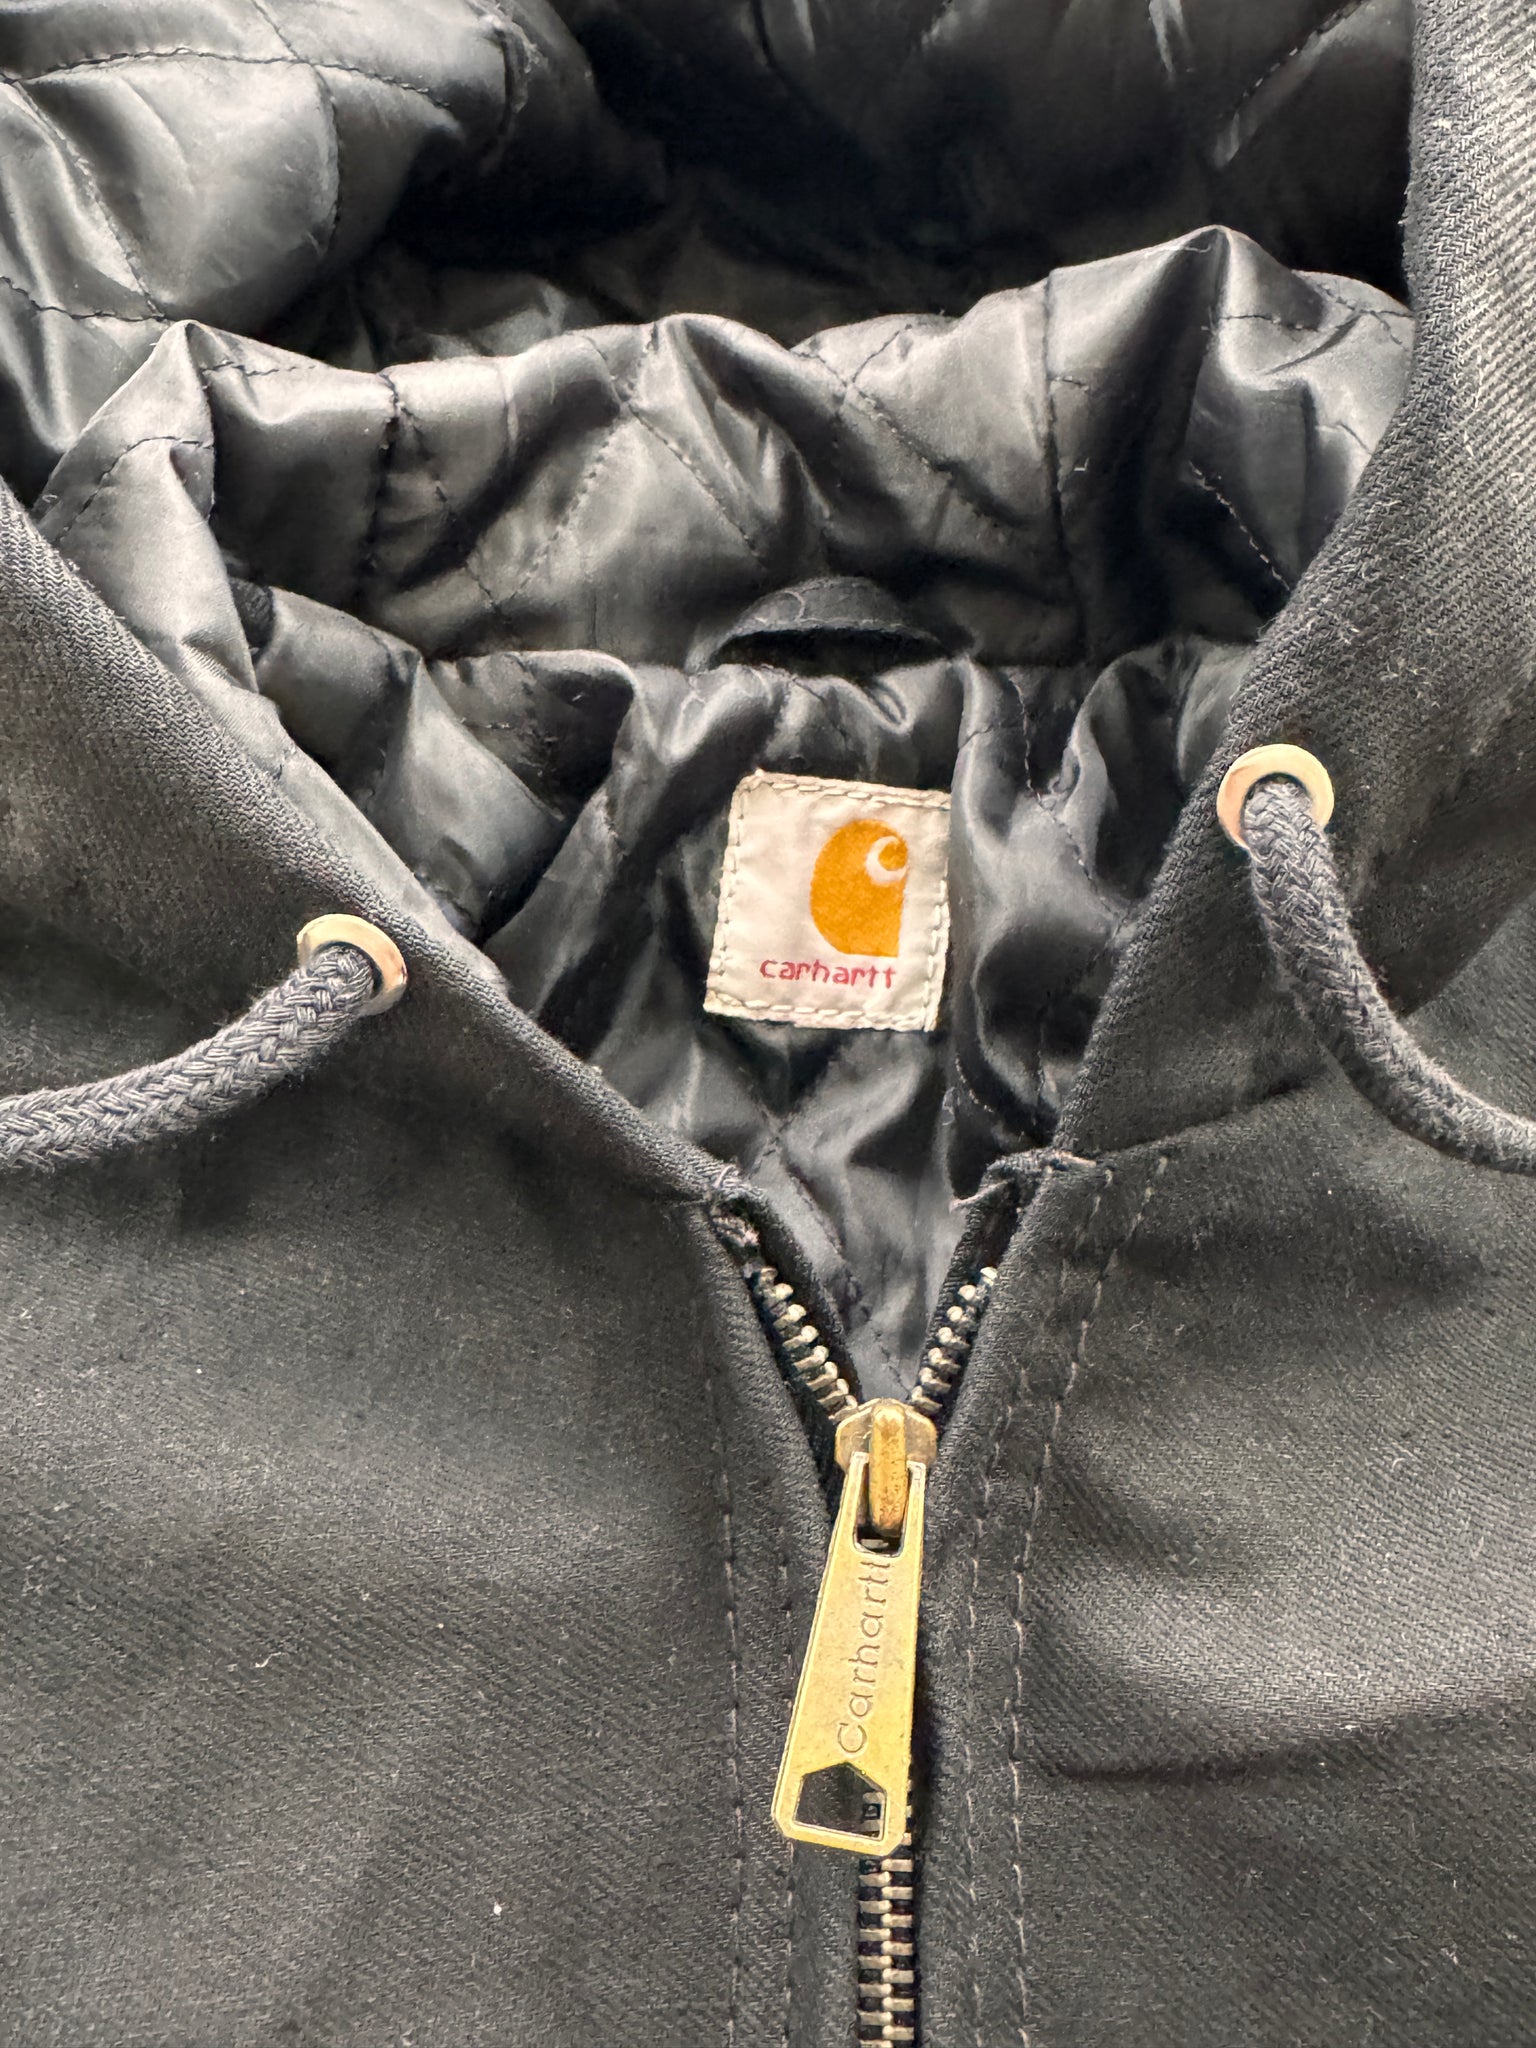 Carhartt Hooded Reworked Jacket - Small, Medium & Large Available ...